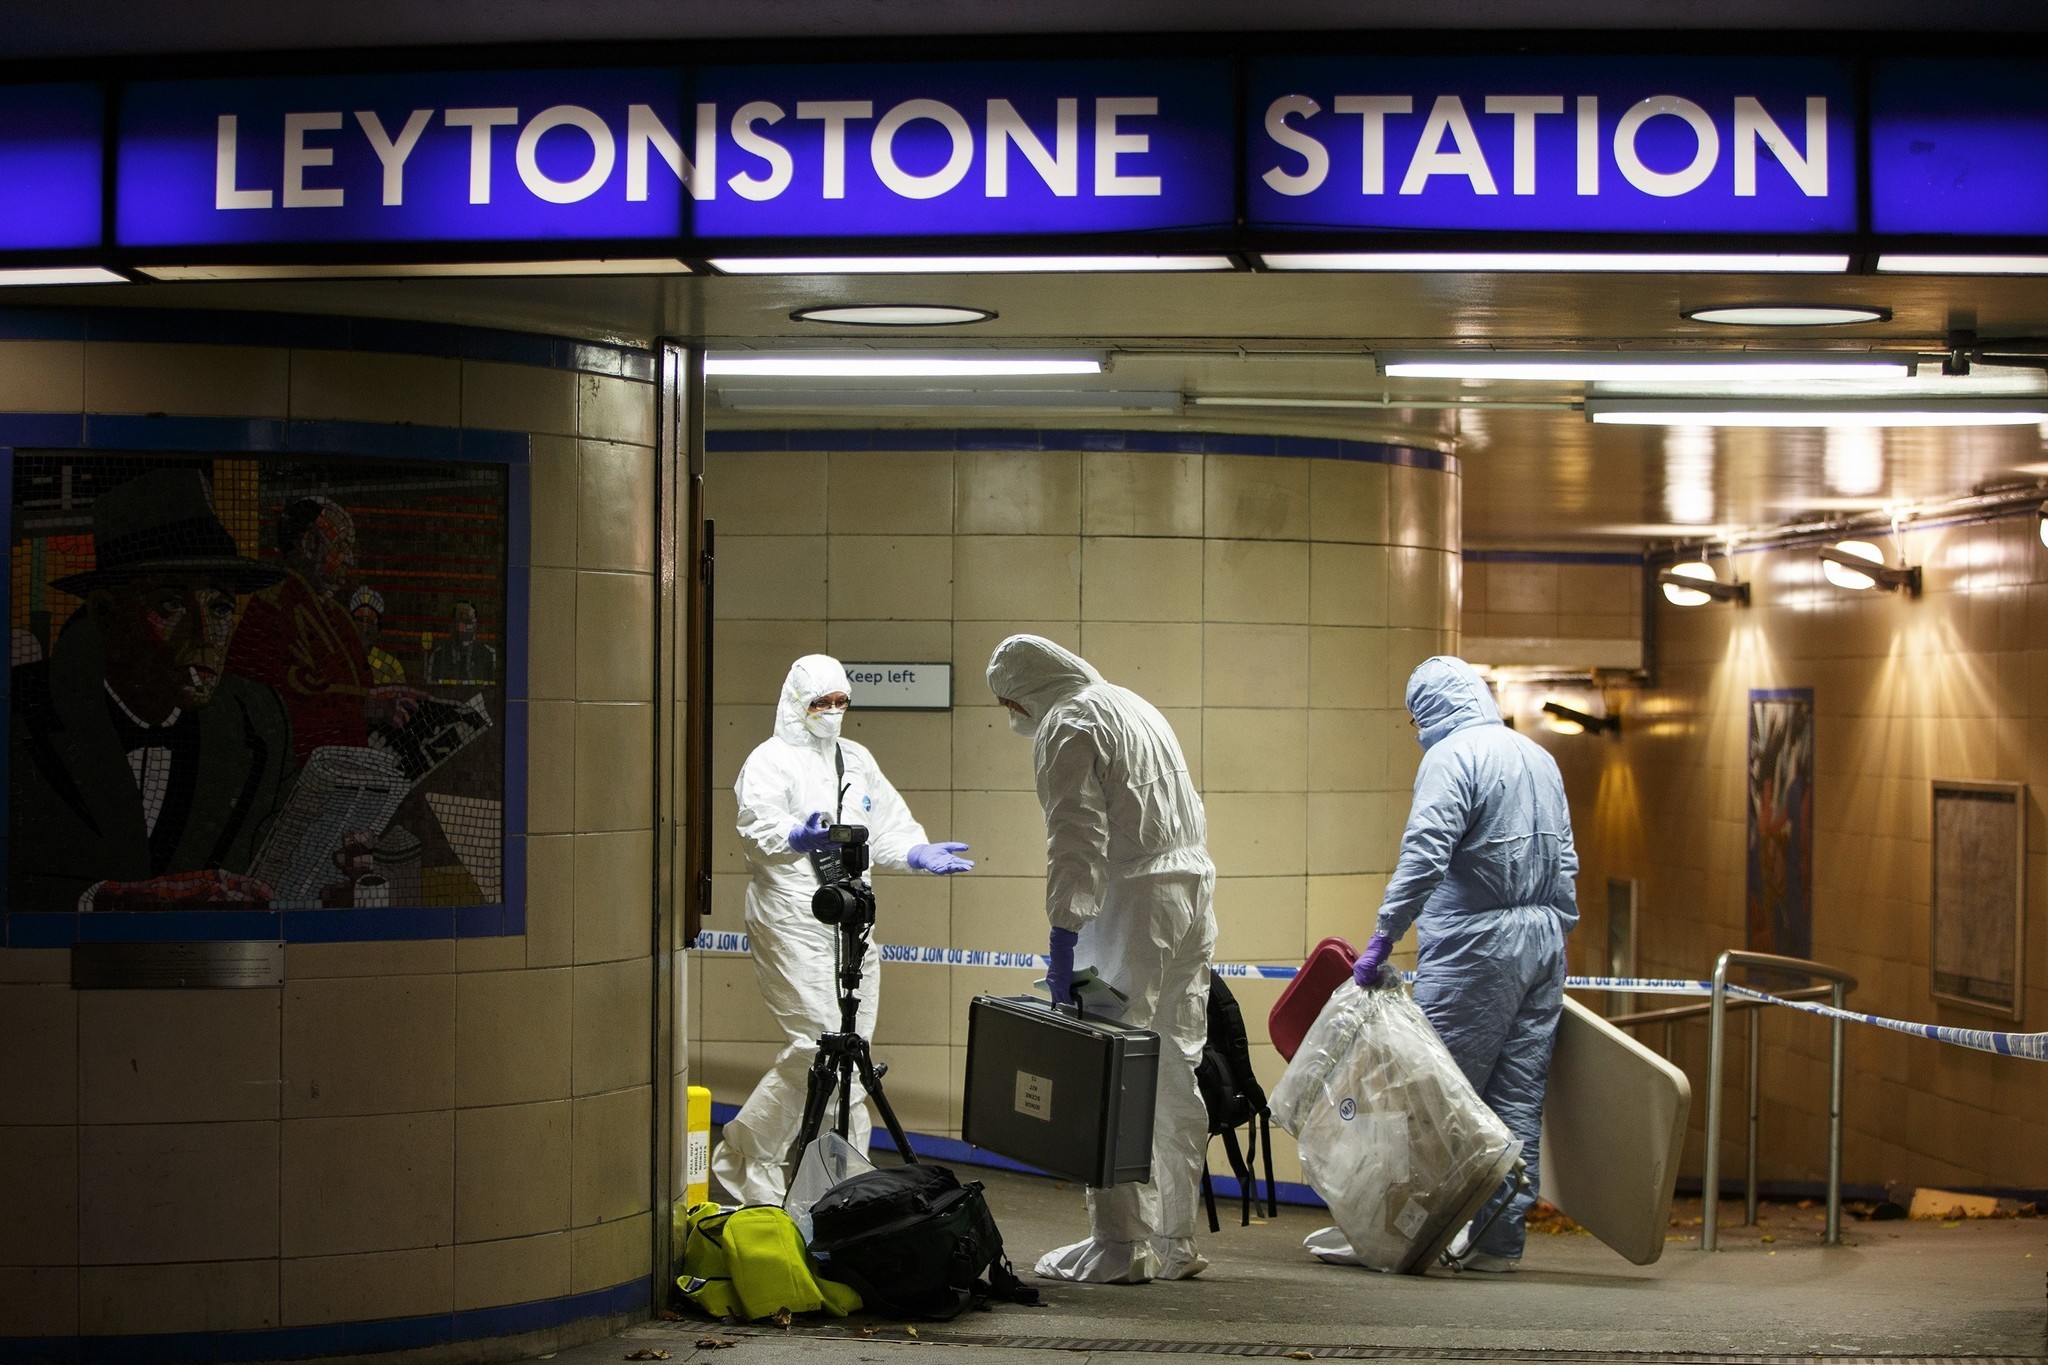 Crime scene investigators collect evidence at Leytonstone tube station in east London.